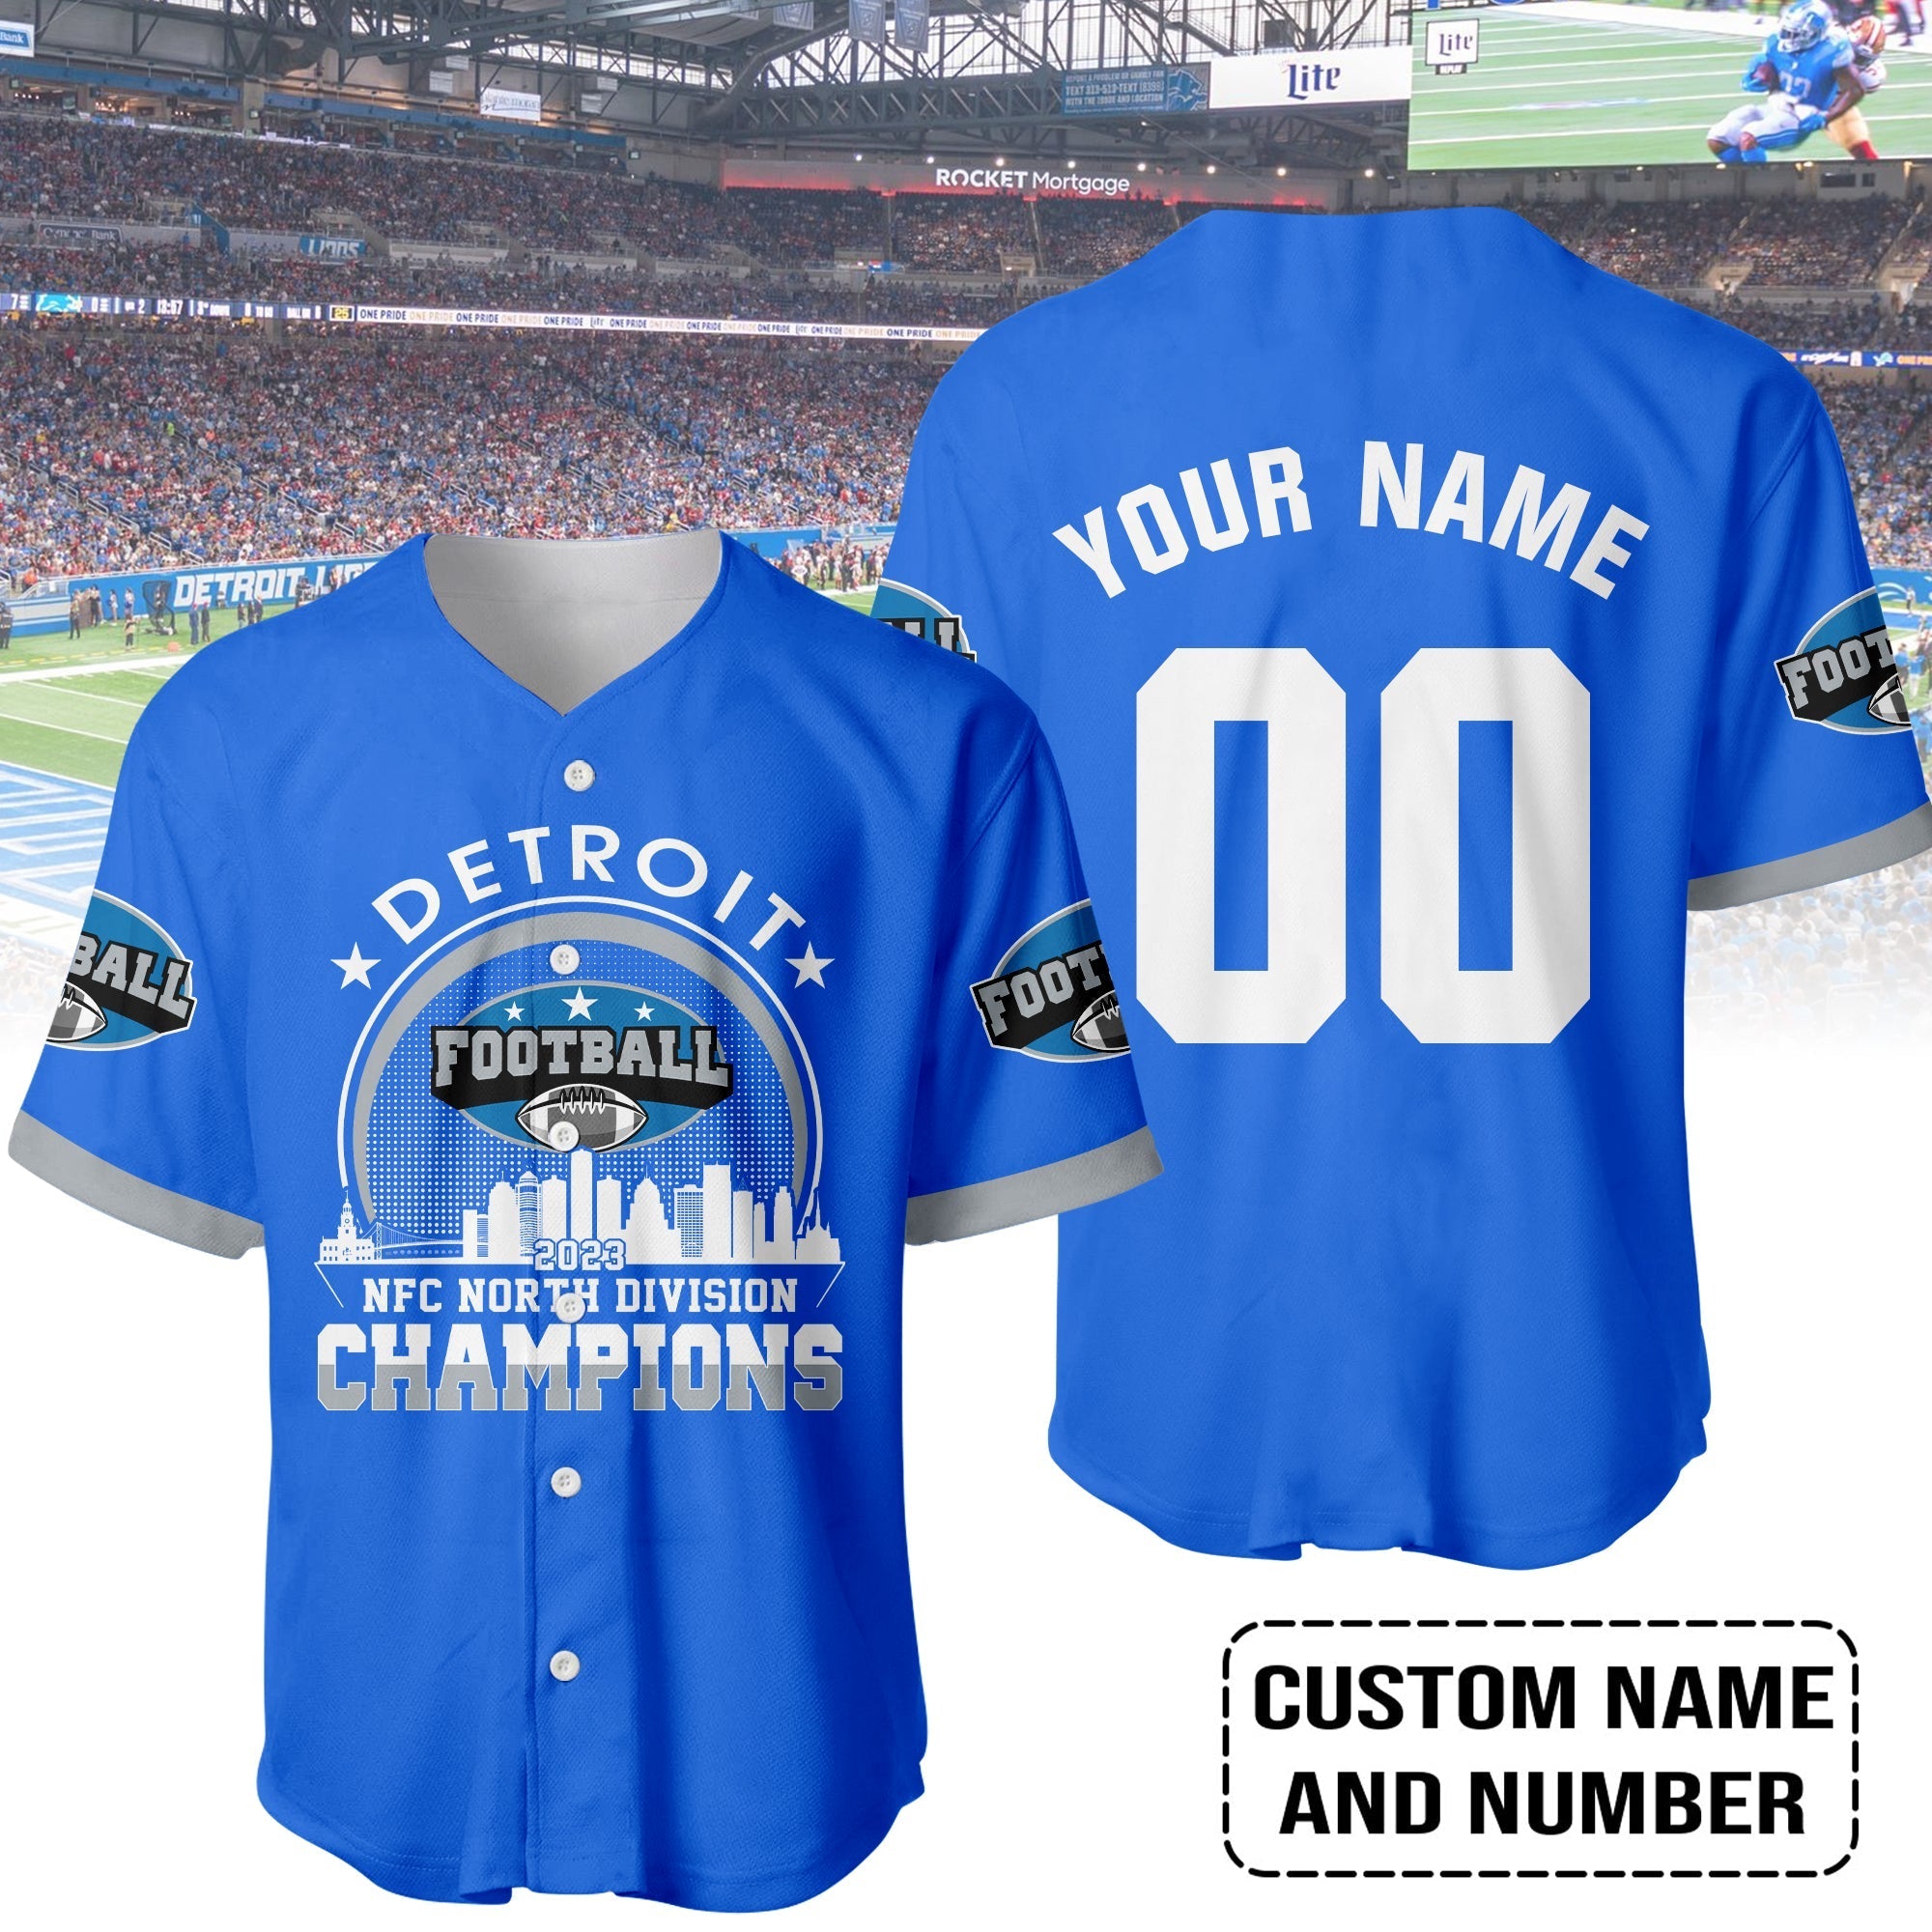 Detroit Skyline Football jersey 2023 NFC North Champions Custom Baseball jersey, Conquered The North Champs Custom Shirts, Detroit Football Fan Gifts